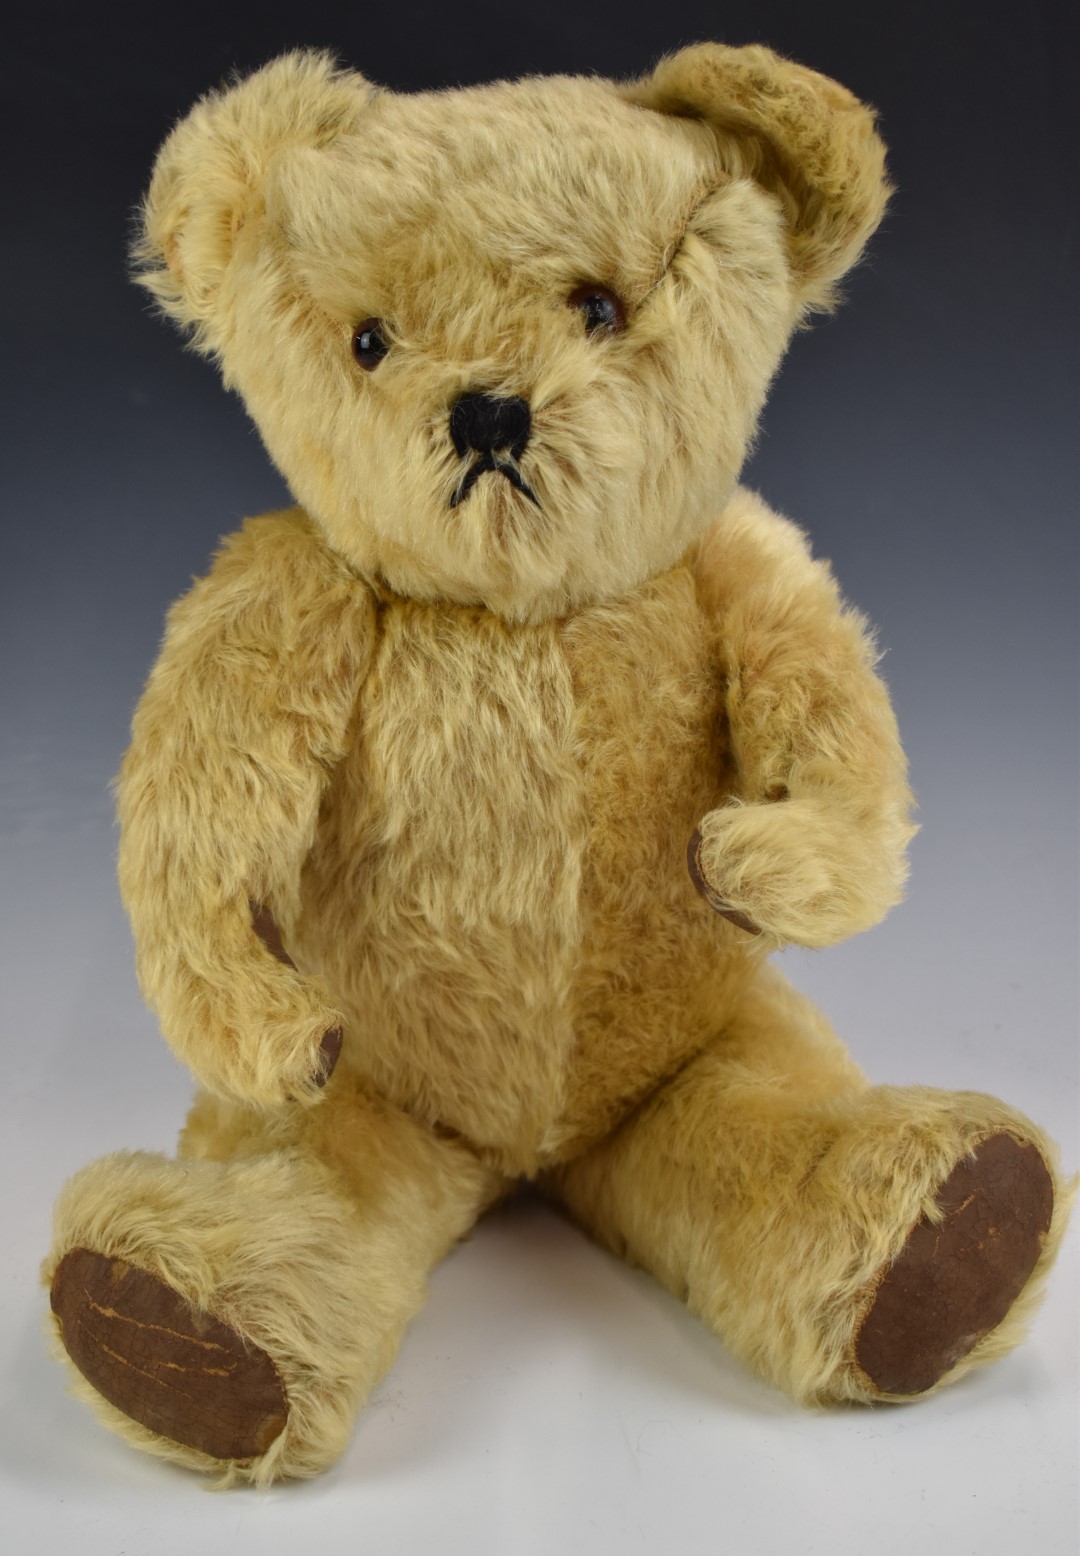 Fadap French Teddy bear with golden mohair, straw filling, disc joints, leather pads and stitched